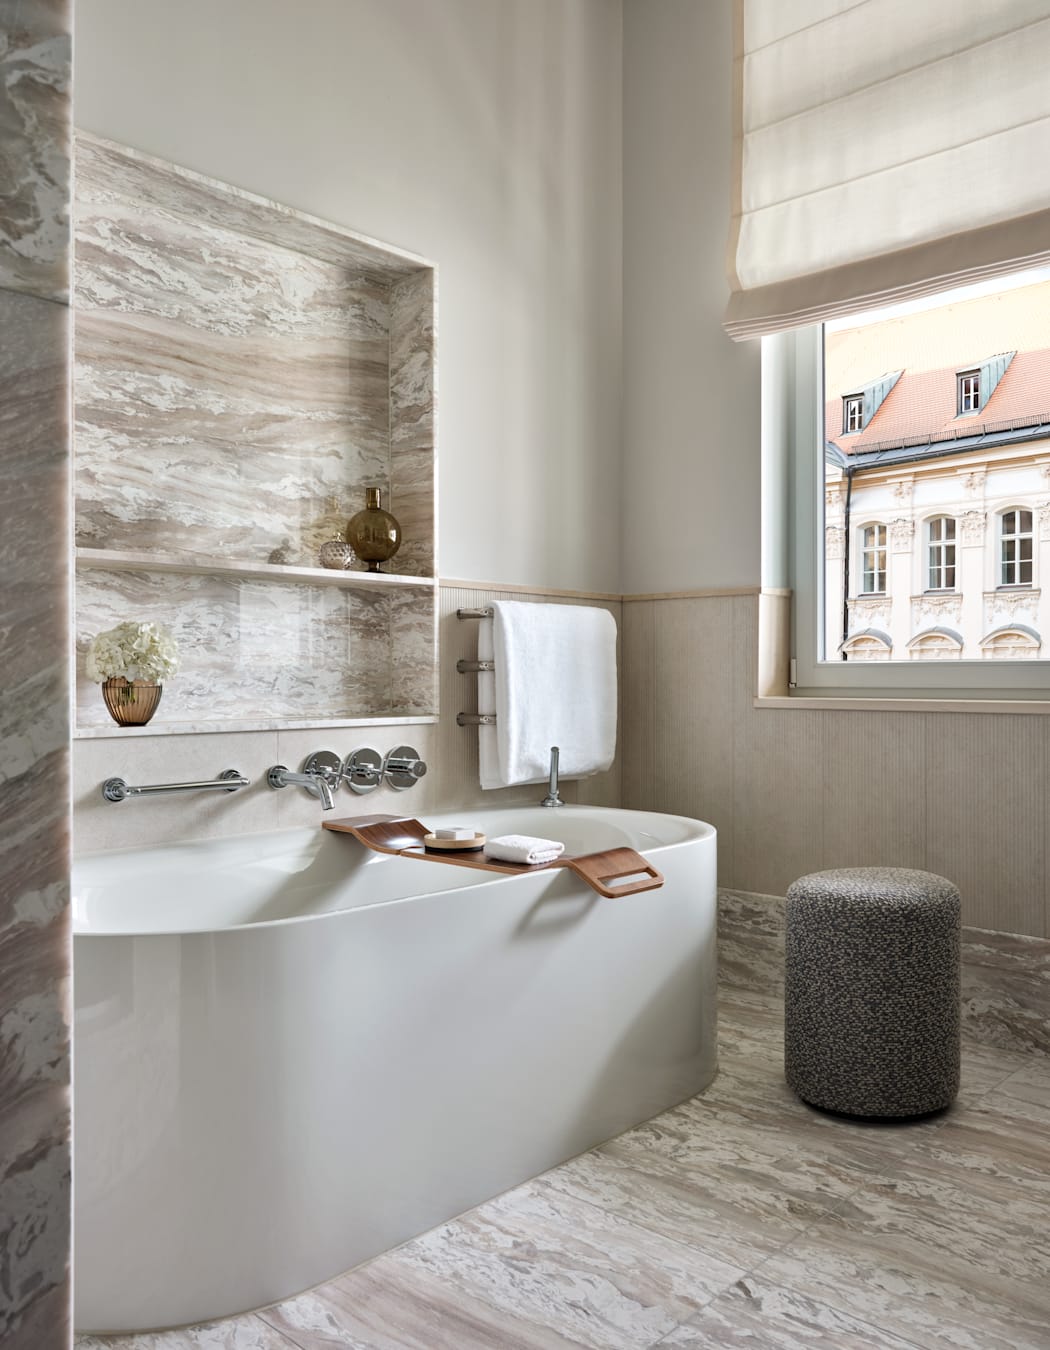 A white bathtub in a marble bathroom, with a window overlooking local area.